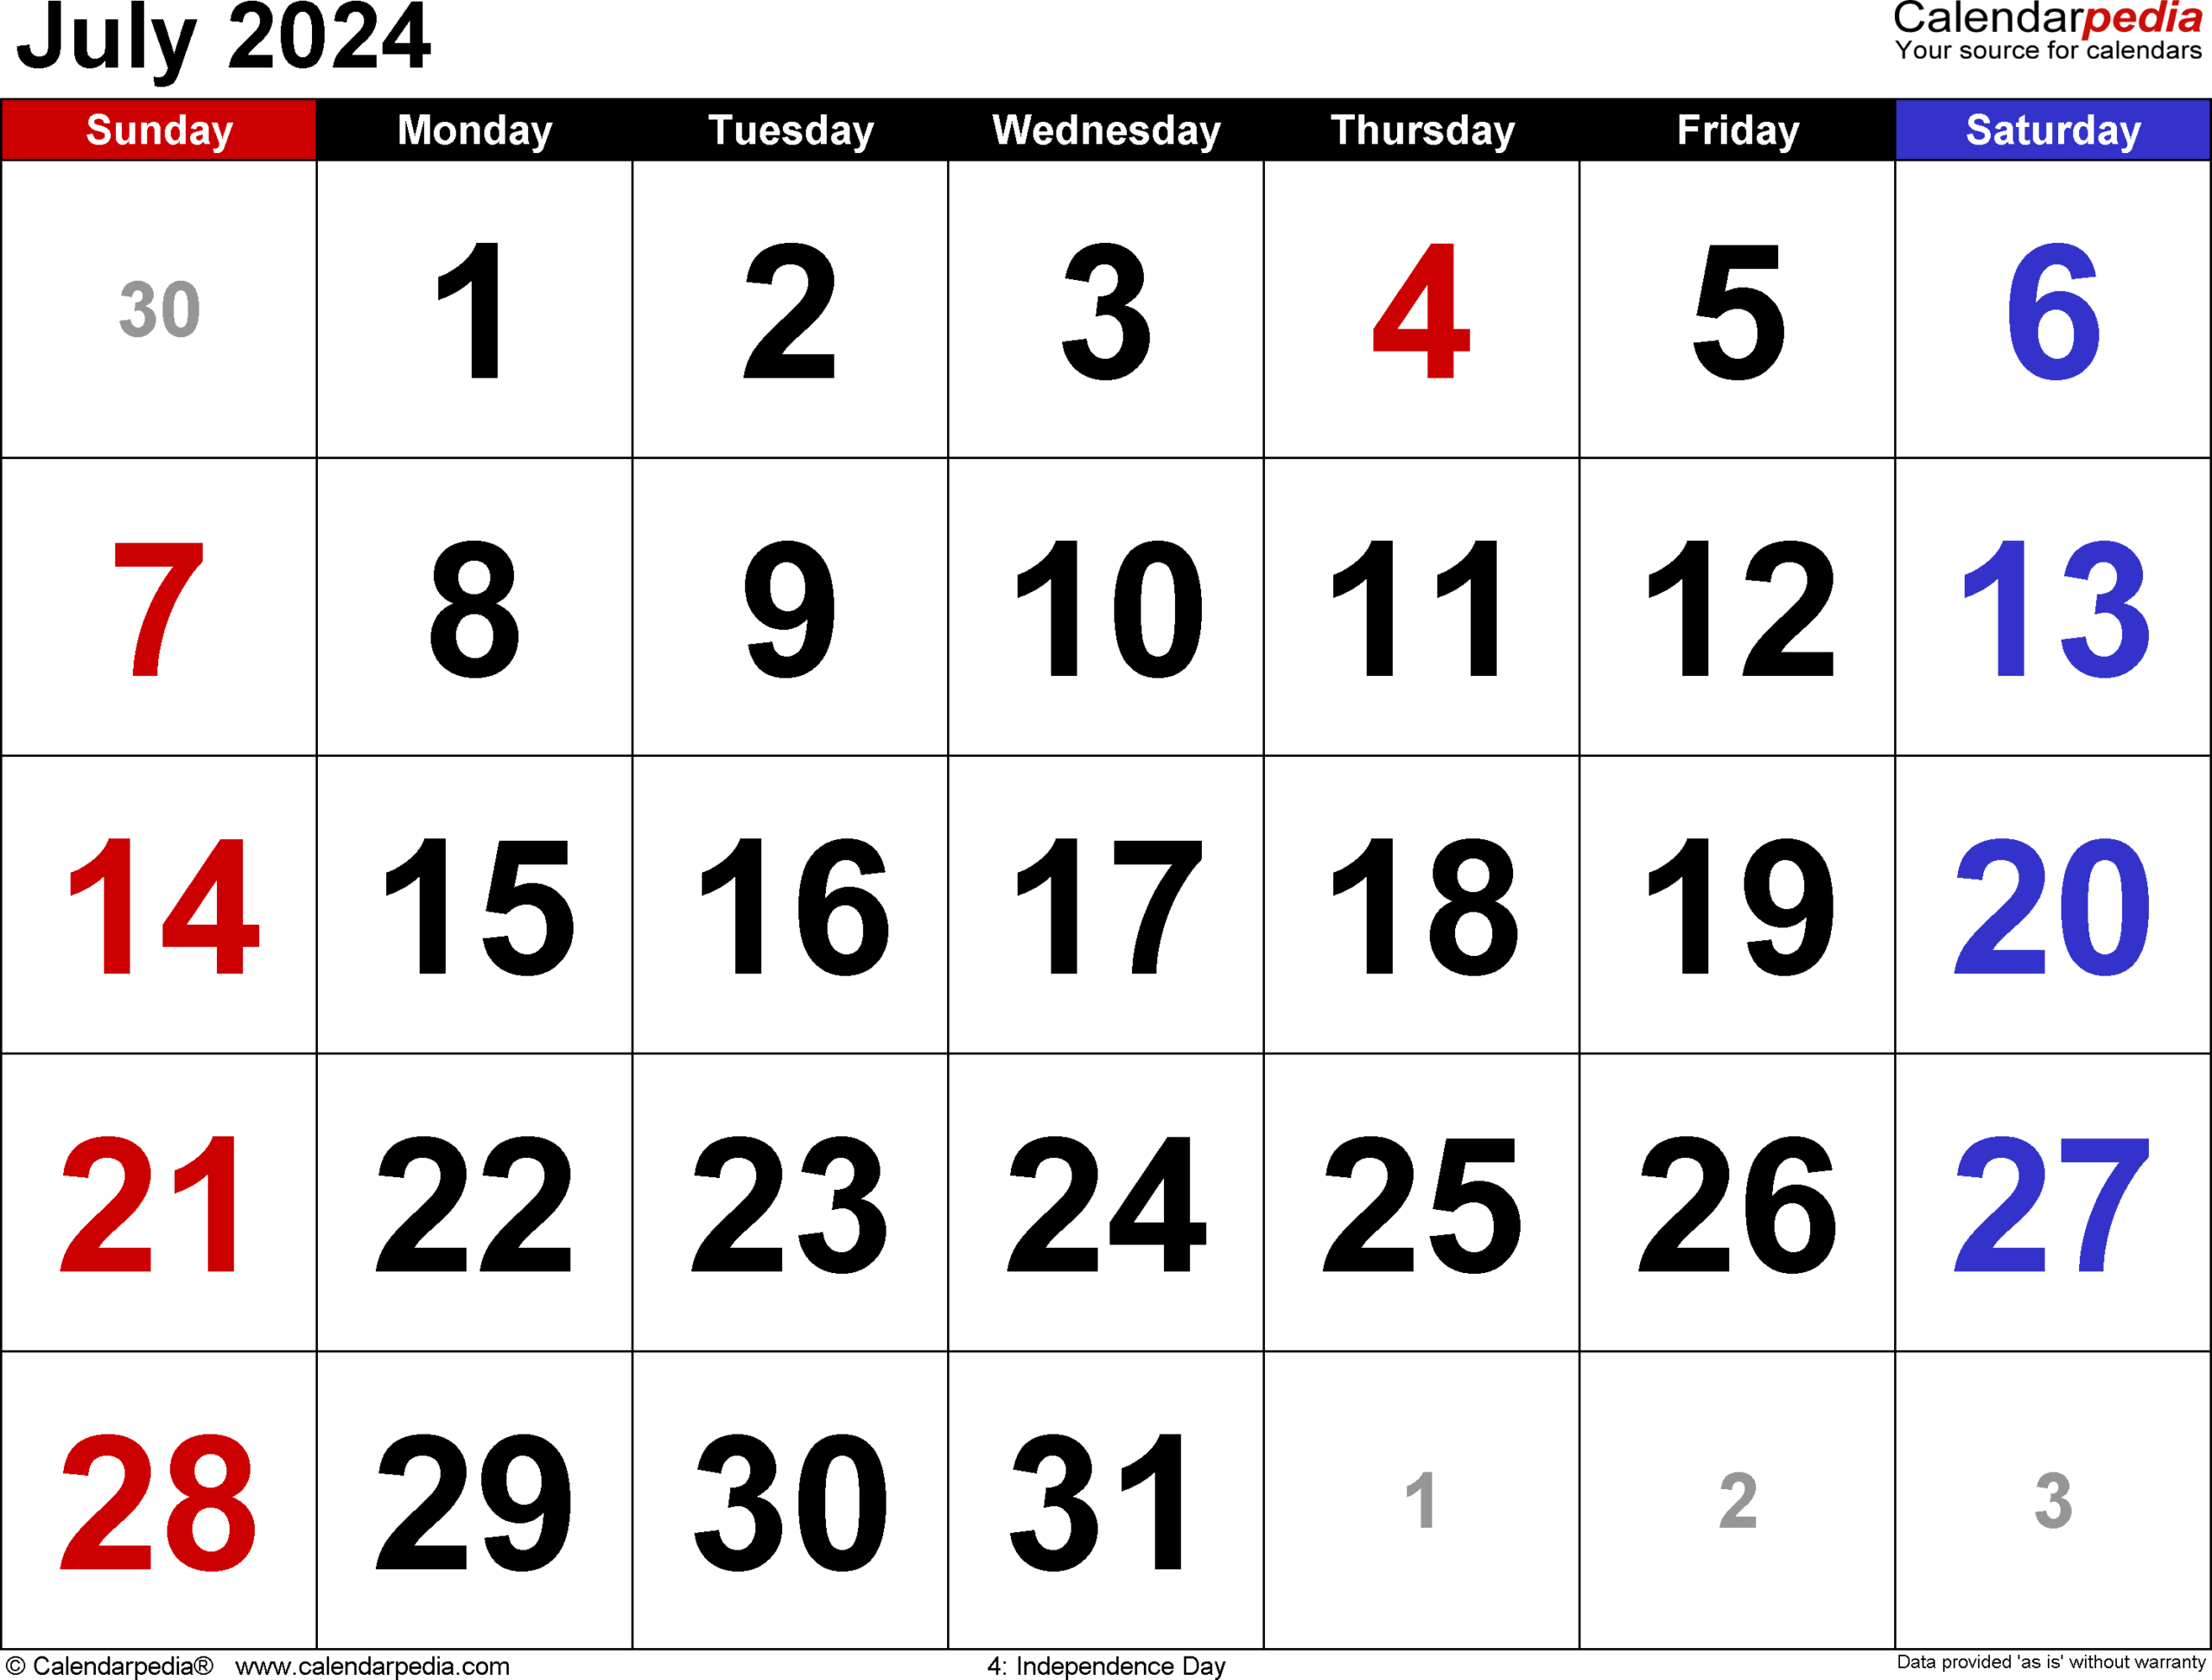 July 2024 Calendar | Templates For Word, Excel And Pdf inside July 2024 Calendar Word